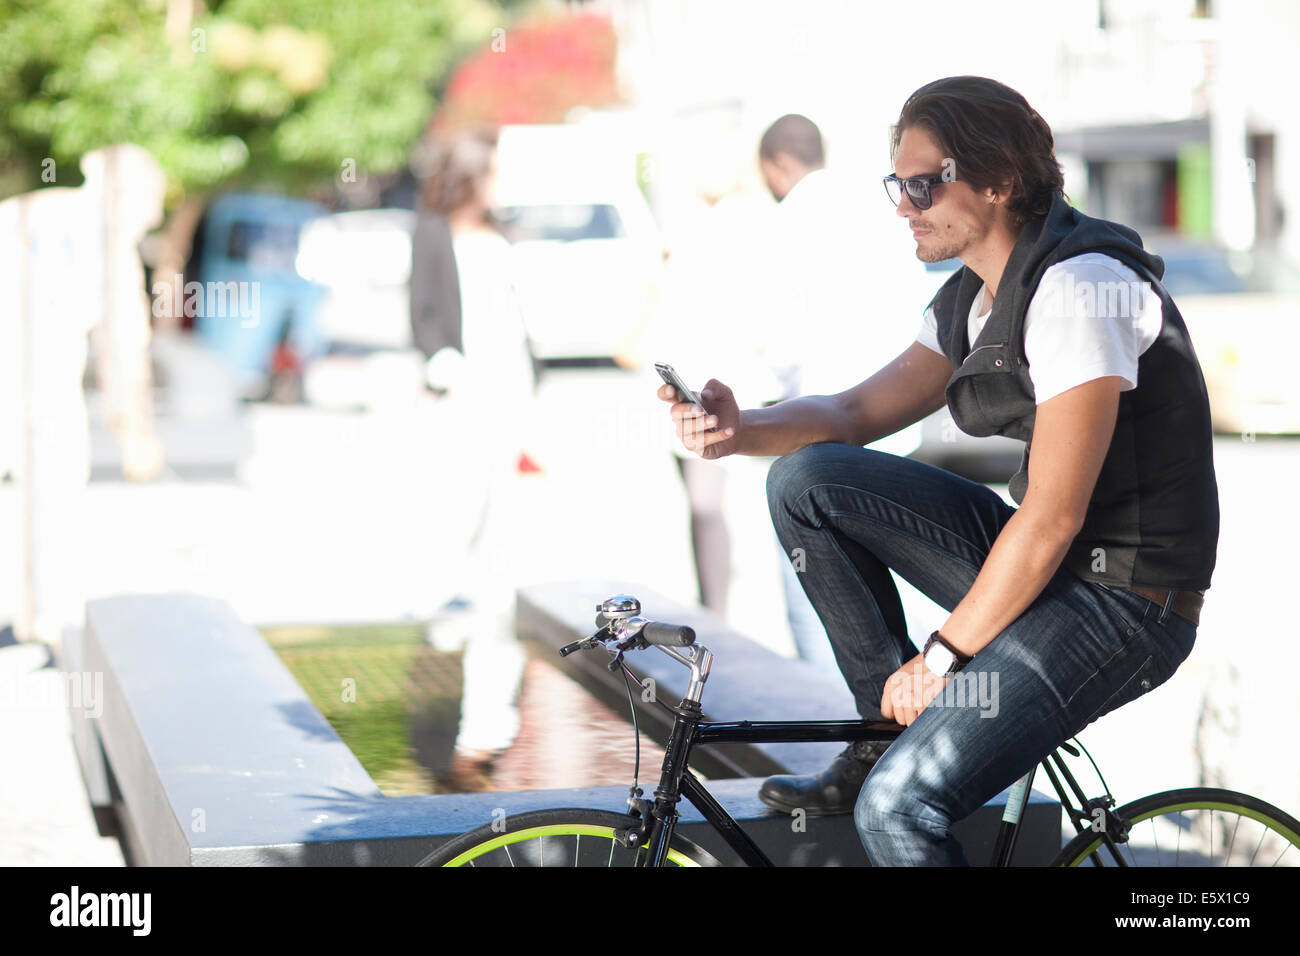 Mid adult male cyclist texting on smartphone on street Stock Photo